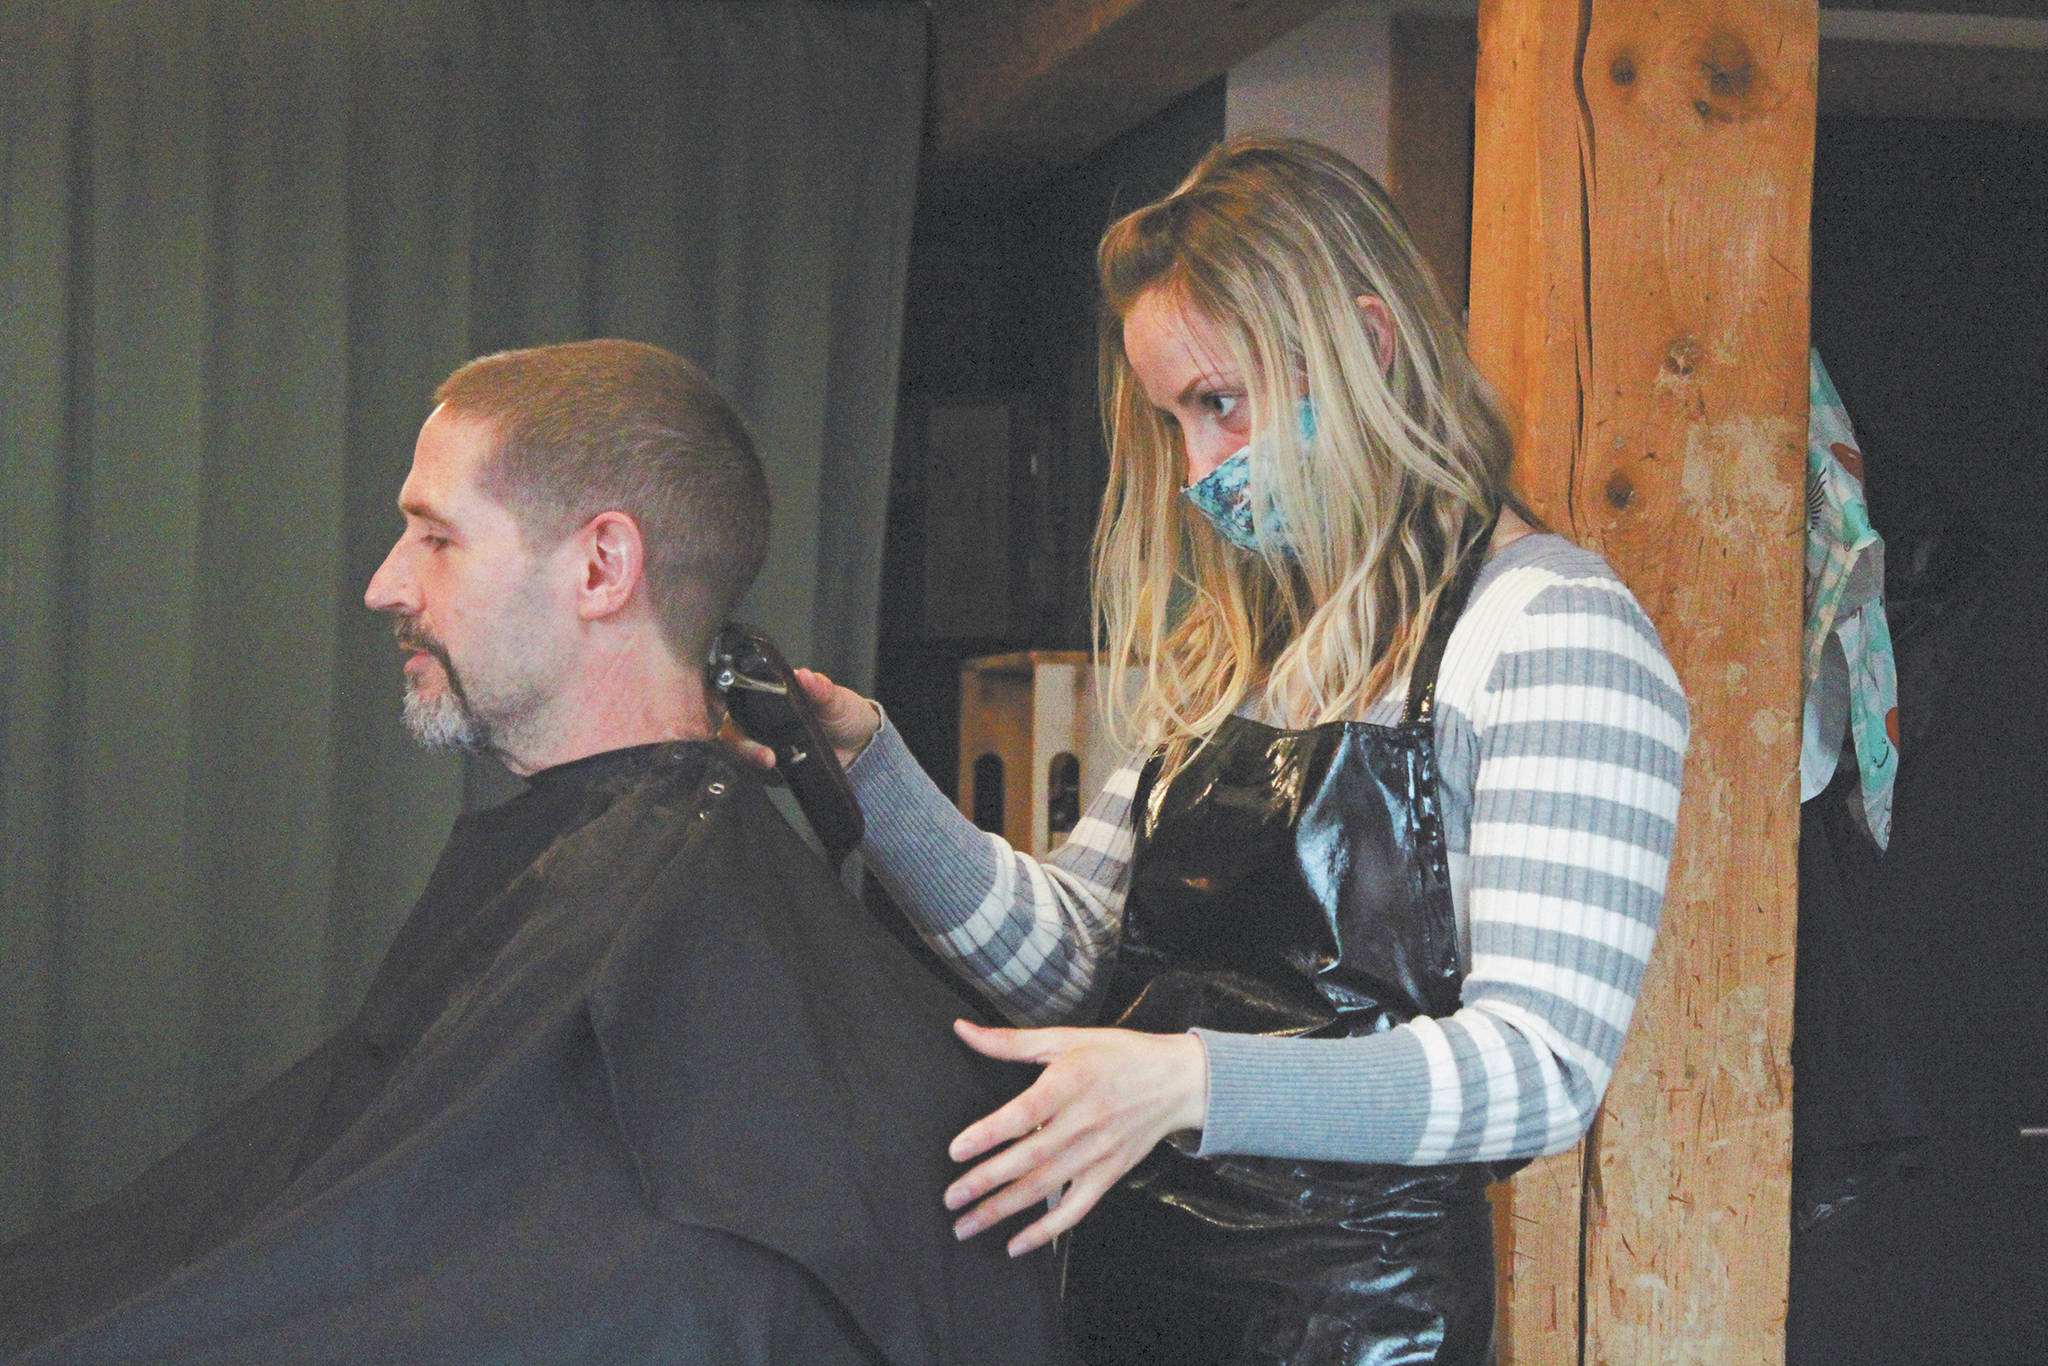 Ashley Story gives a haircut to client Michael Halstead on Friday at her salon Short Cuts on Lake Street in Homer, Alaska. Story’s is one of several Homer businesses to reopen their doors Friday according to relaxed state restrictions, while several others have opted to wait. (Photo by Megan Pacer/Homer News)